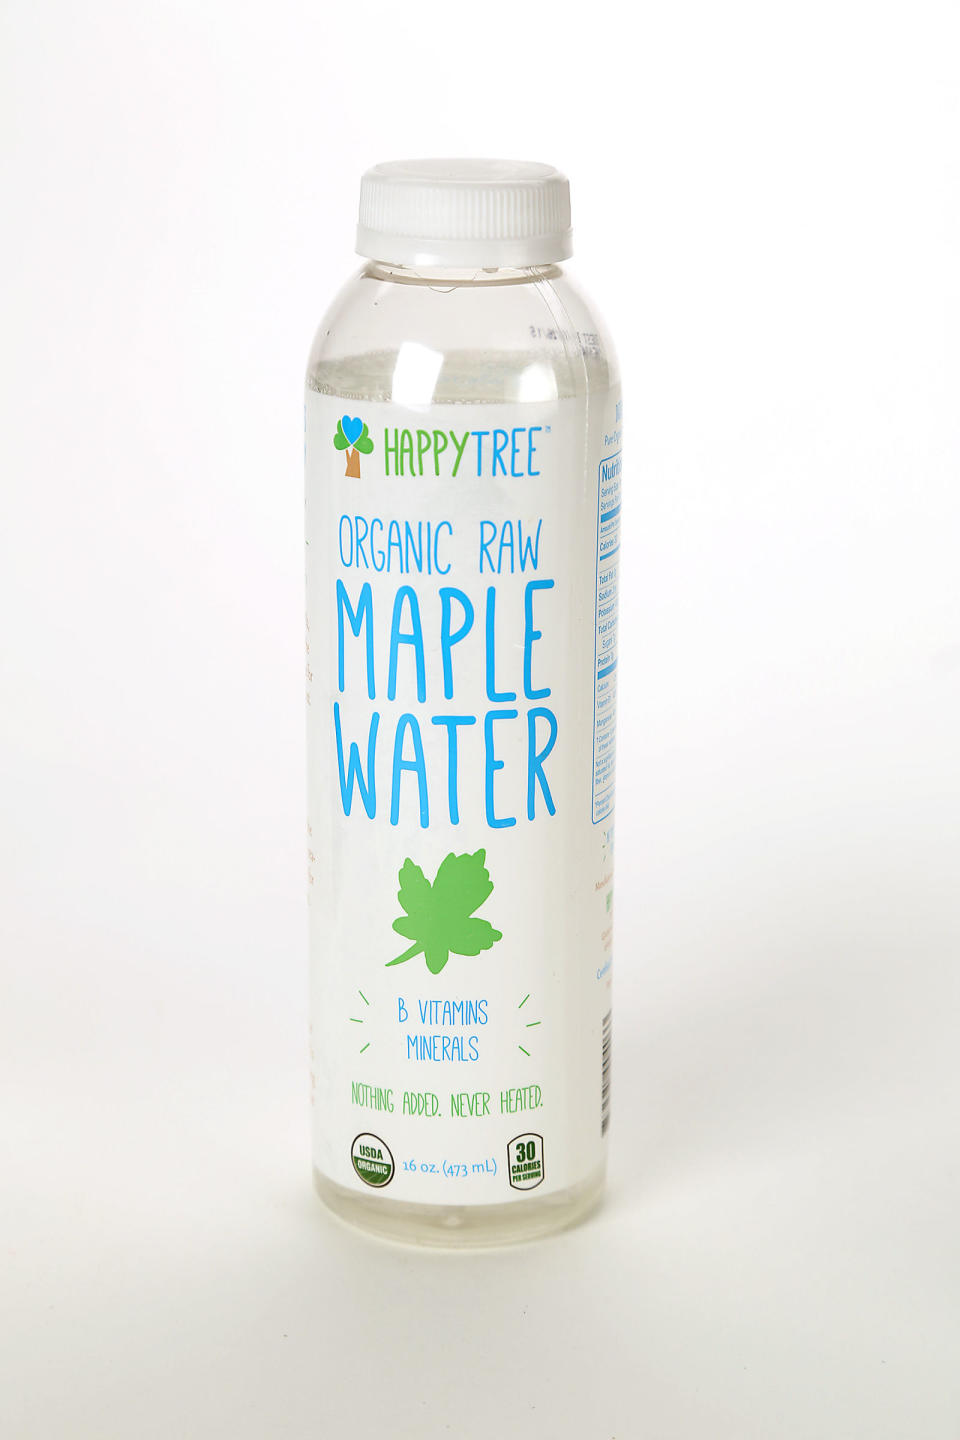 22) Maple Water or Sap Water